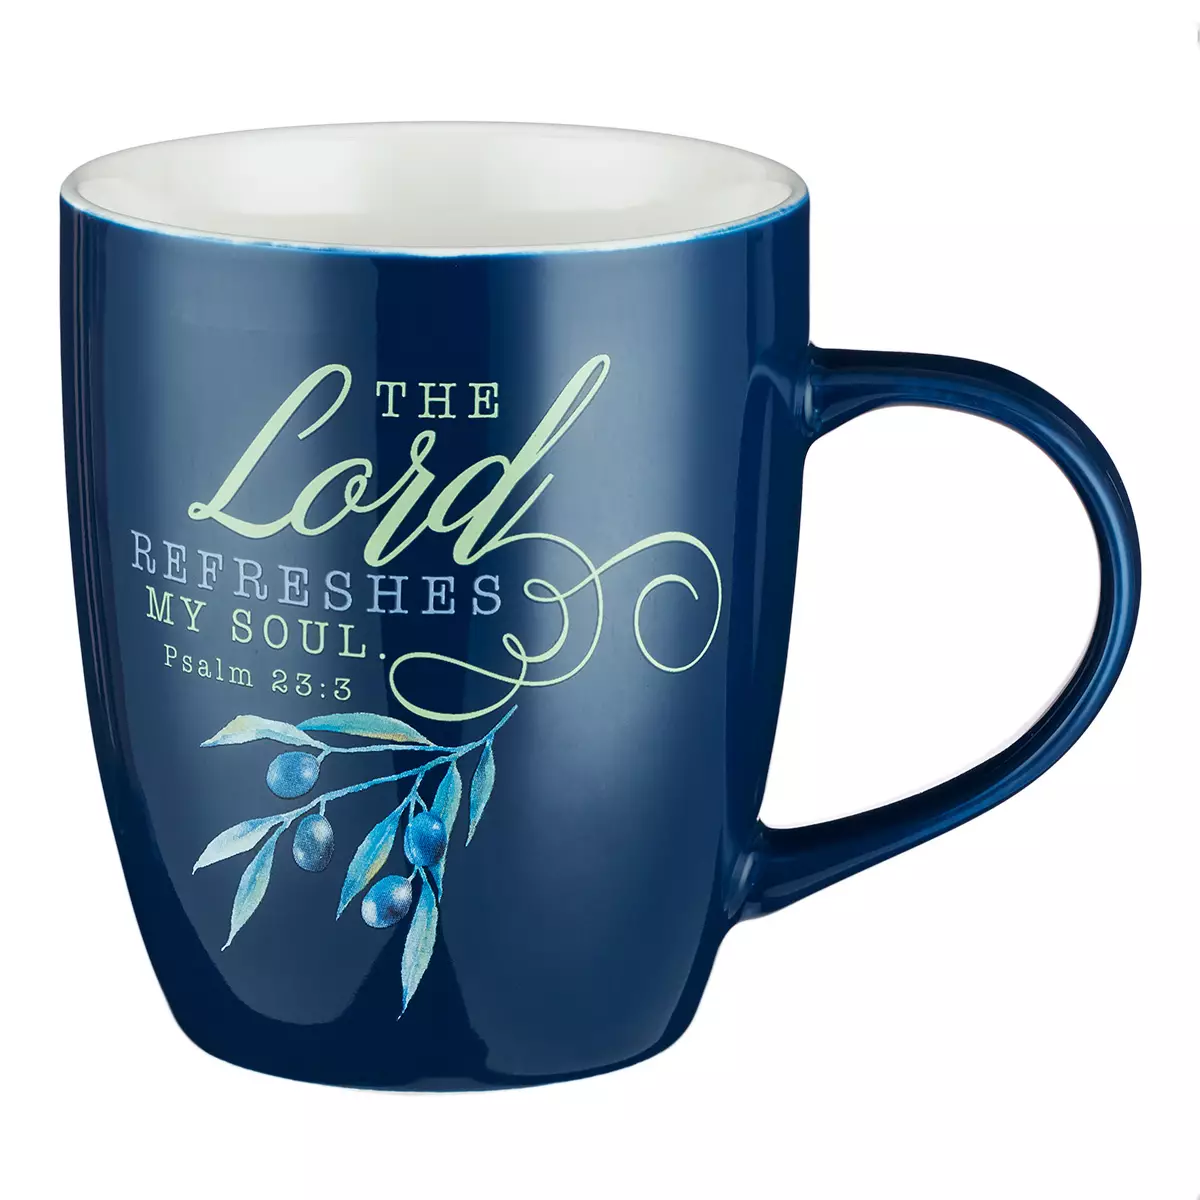 Mug White/Navy Berries The Lord Refreshes My Soul Ps. 23:3